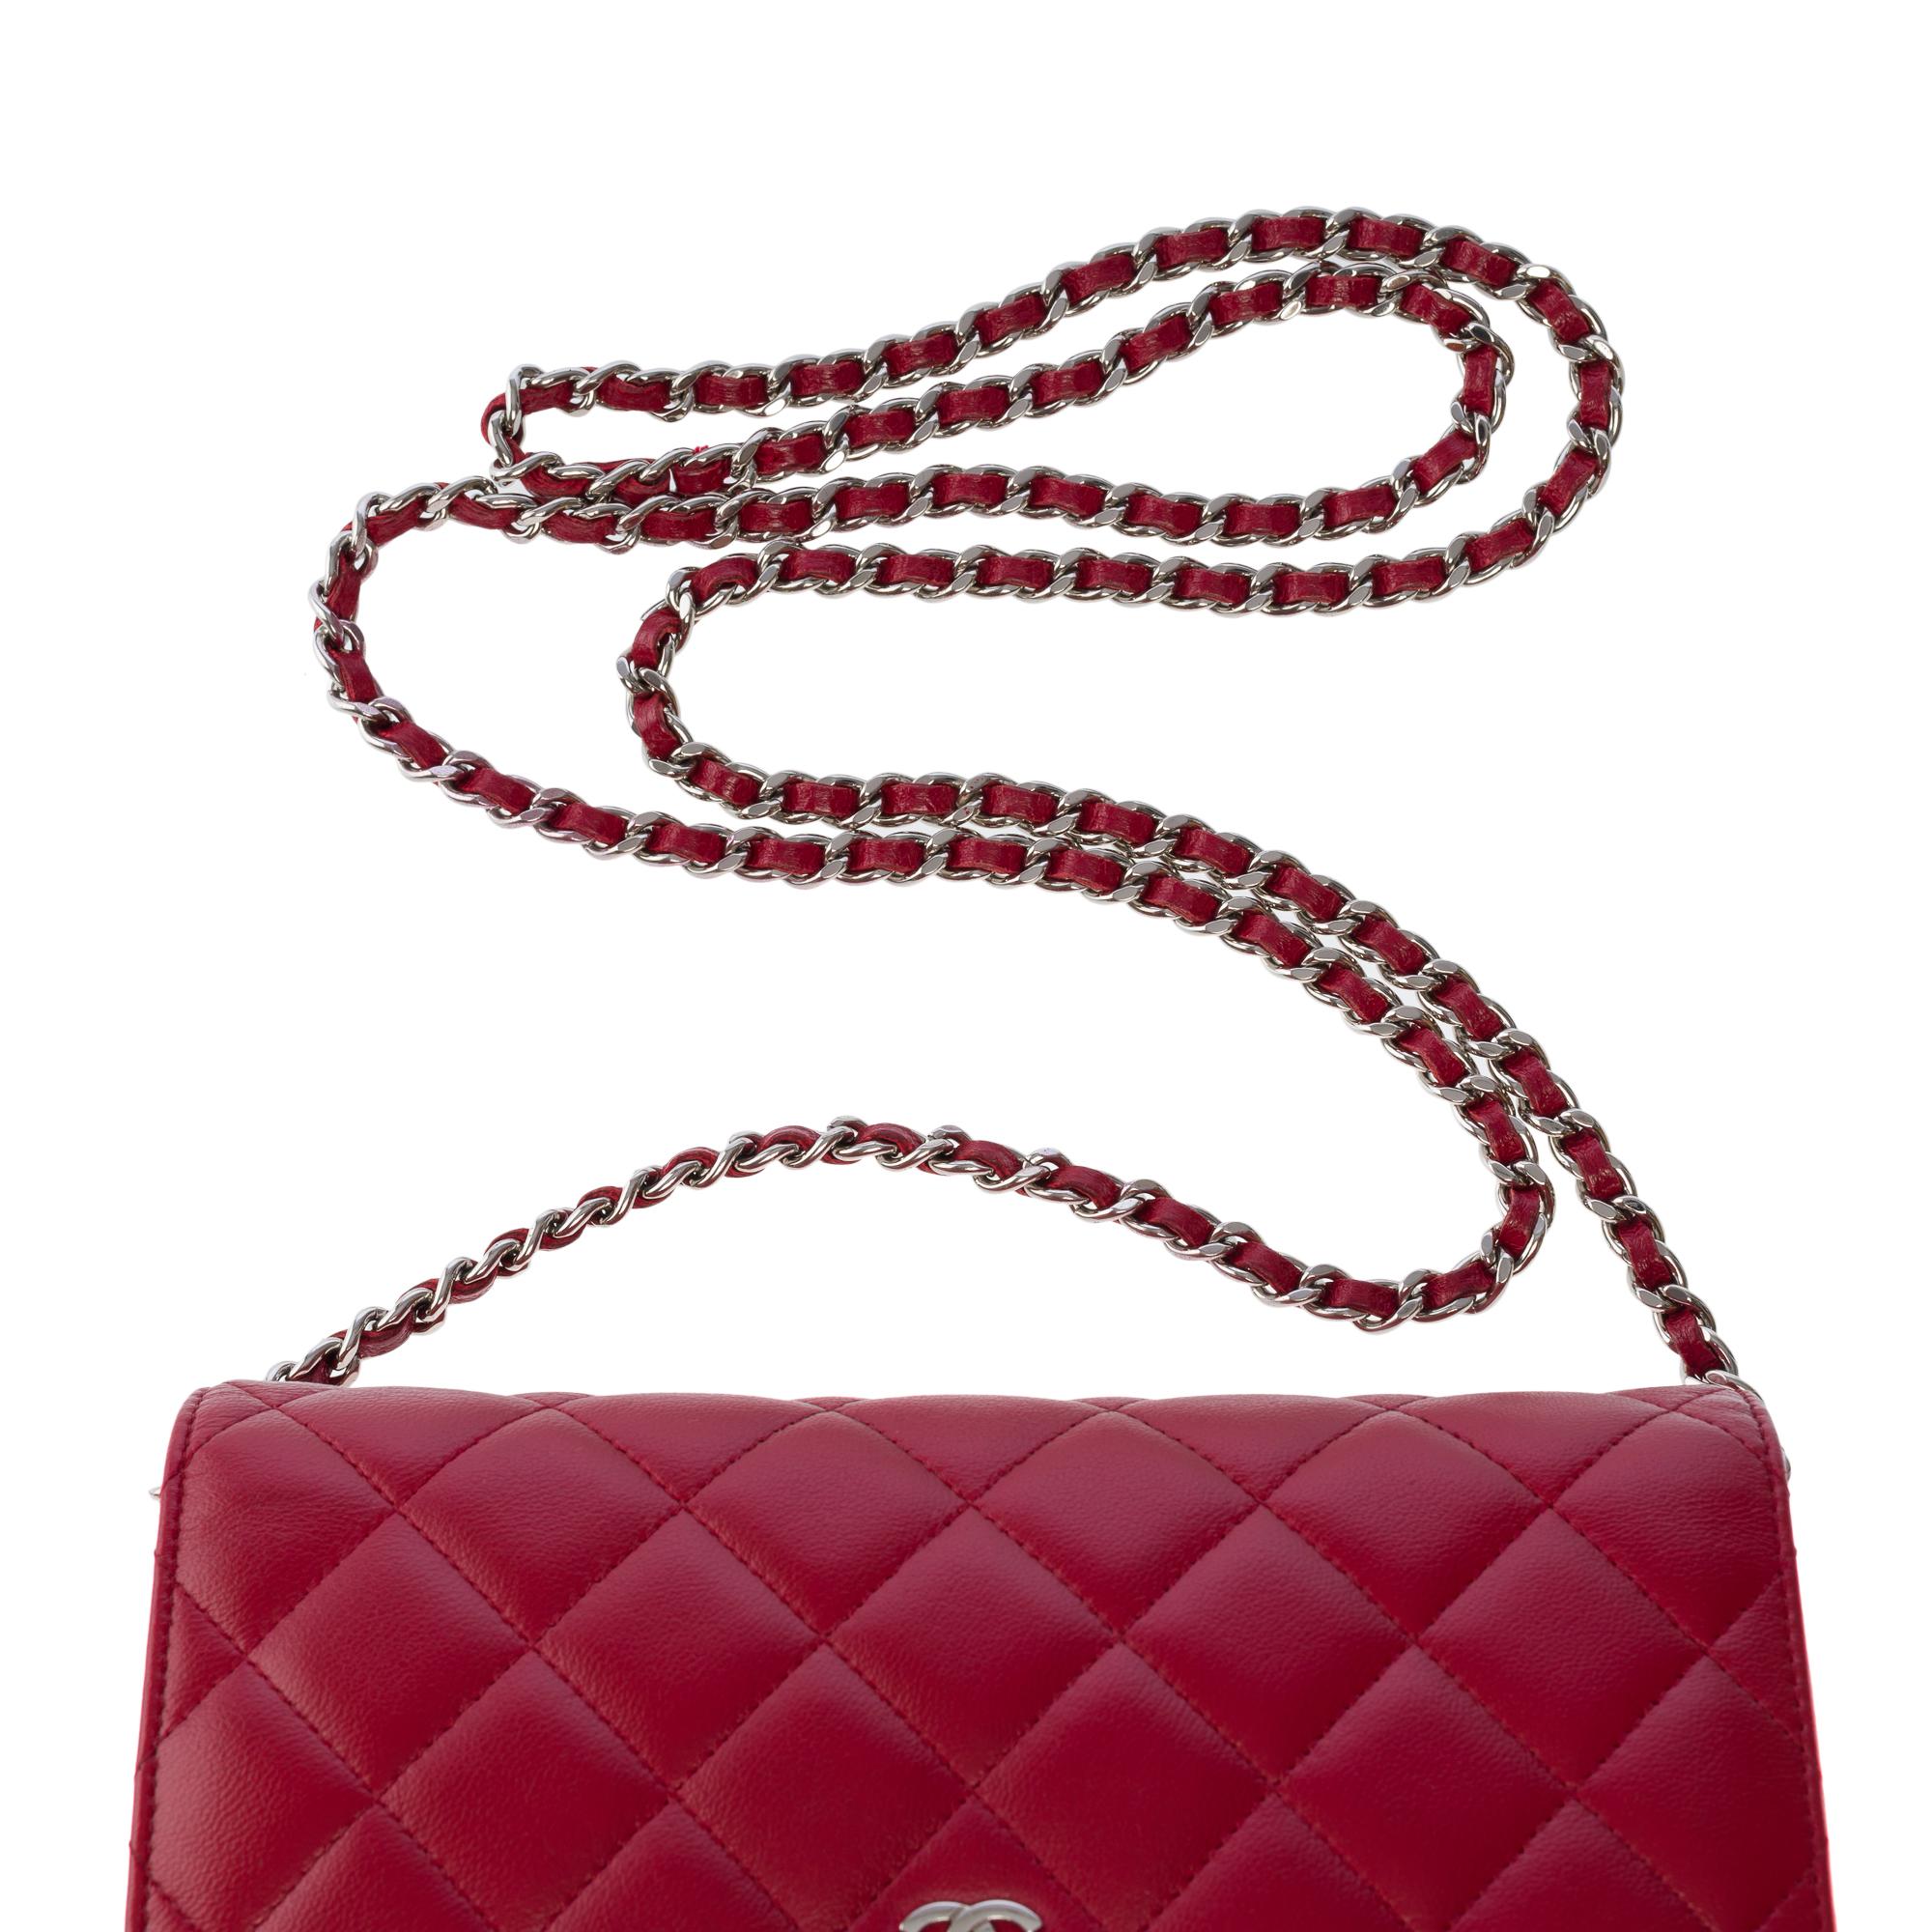 Chanel Wallet on Chain (WOC)  shoulder bag in Red quilted lambskin leather, GHW 5